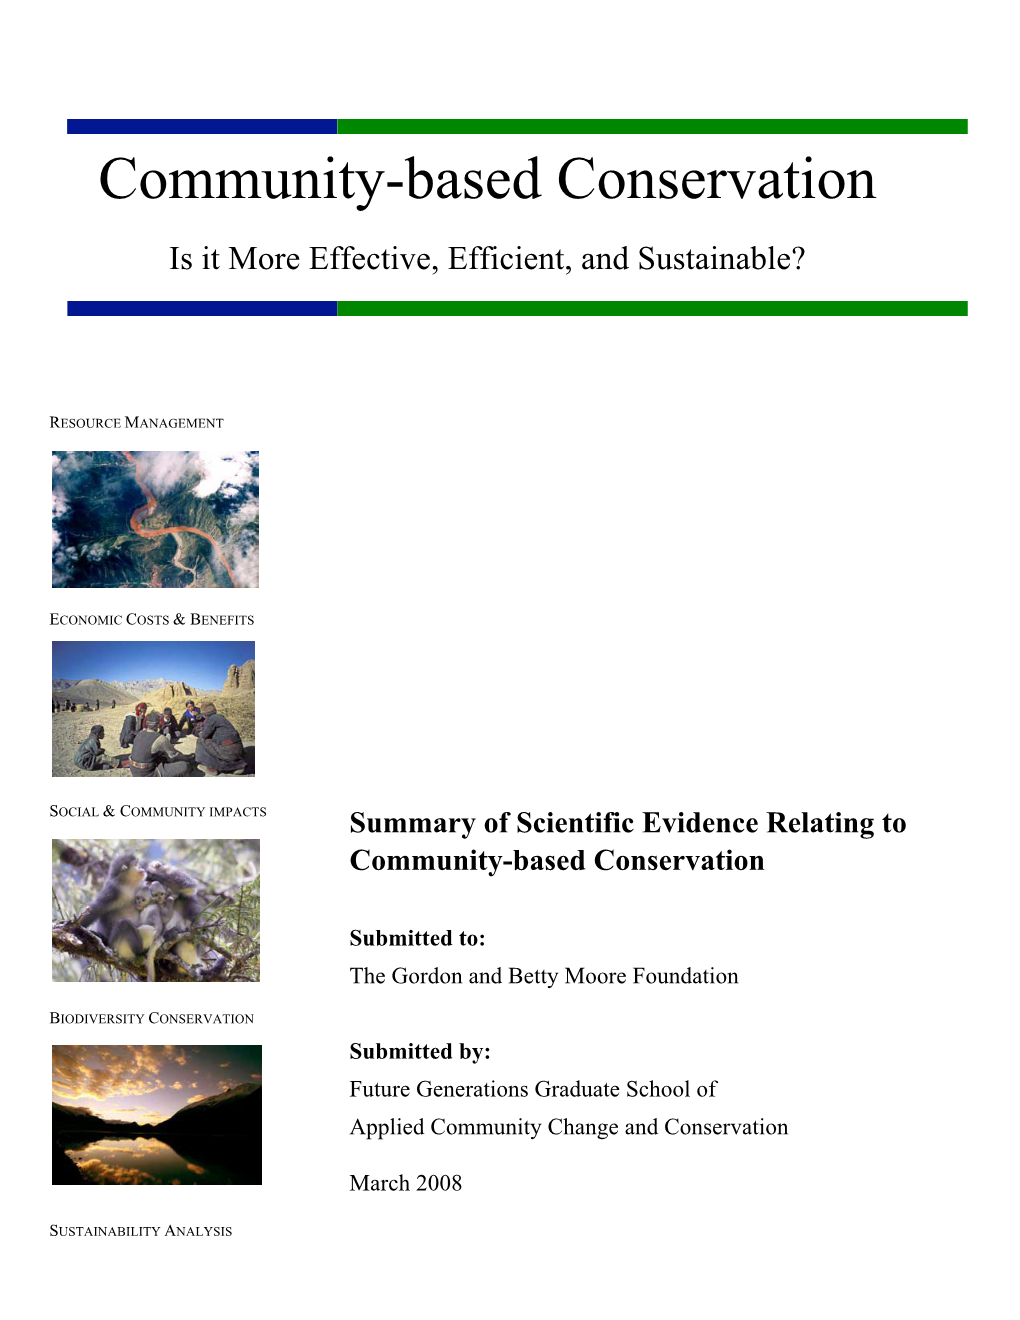 Community-Based Conservation Is It More Effective, Efficient, and Sustainable?